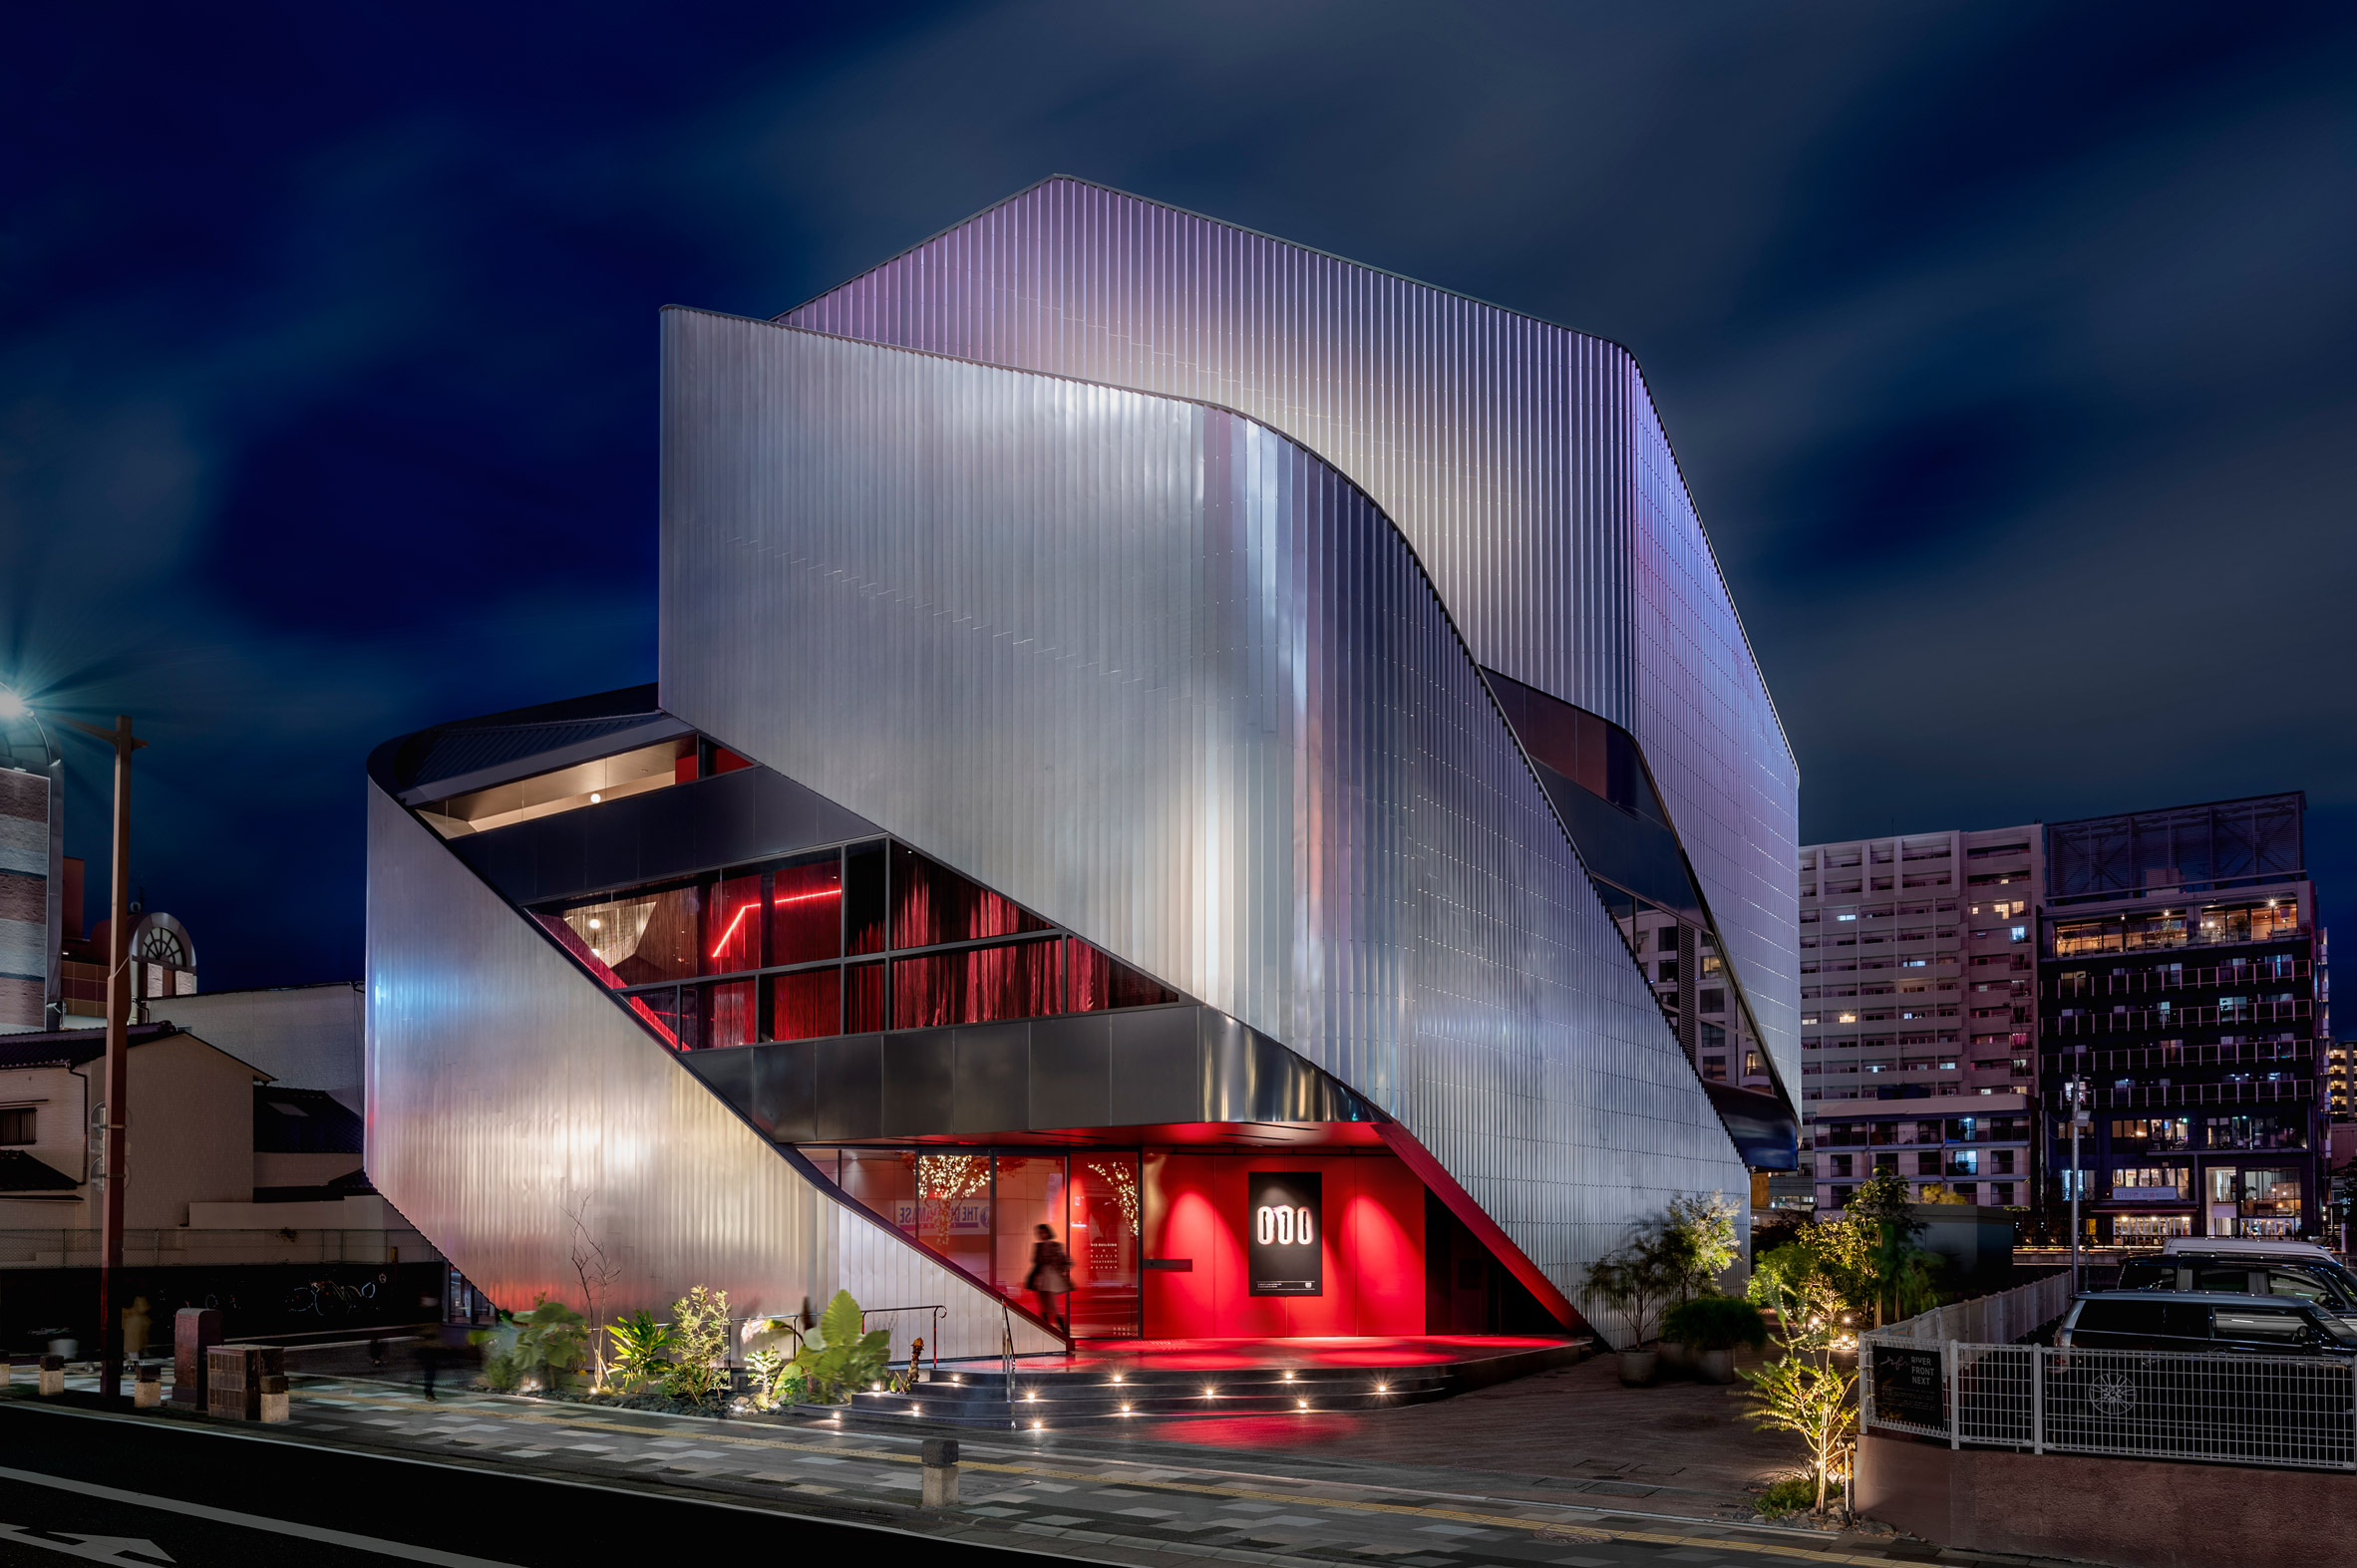 A theatre building on a city street corner with sweeping steel exterior panels lit by spotlights on the ground